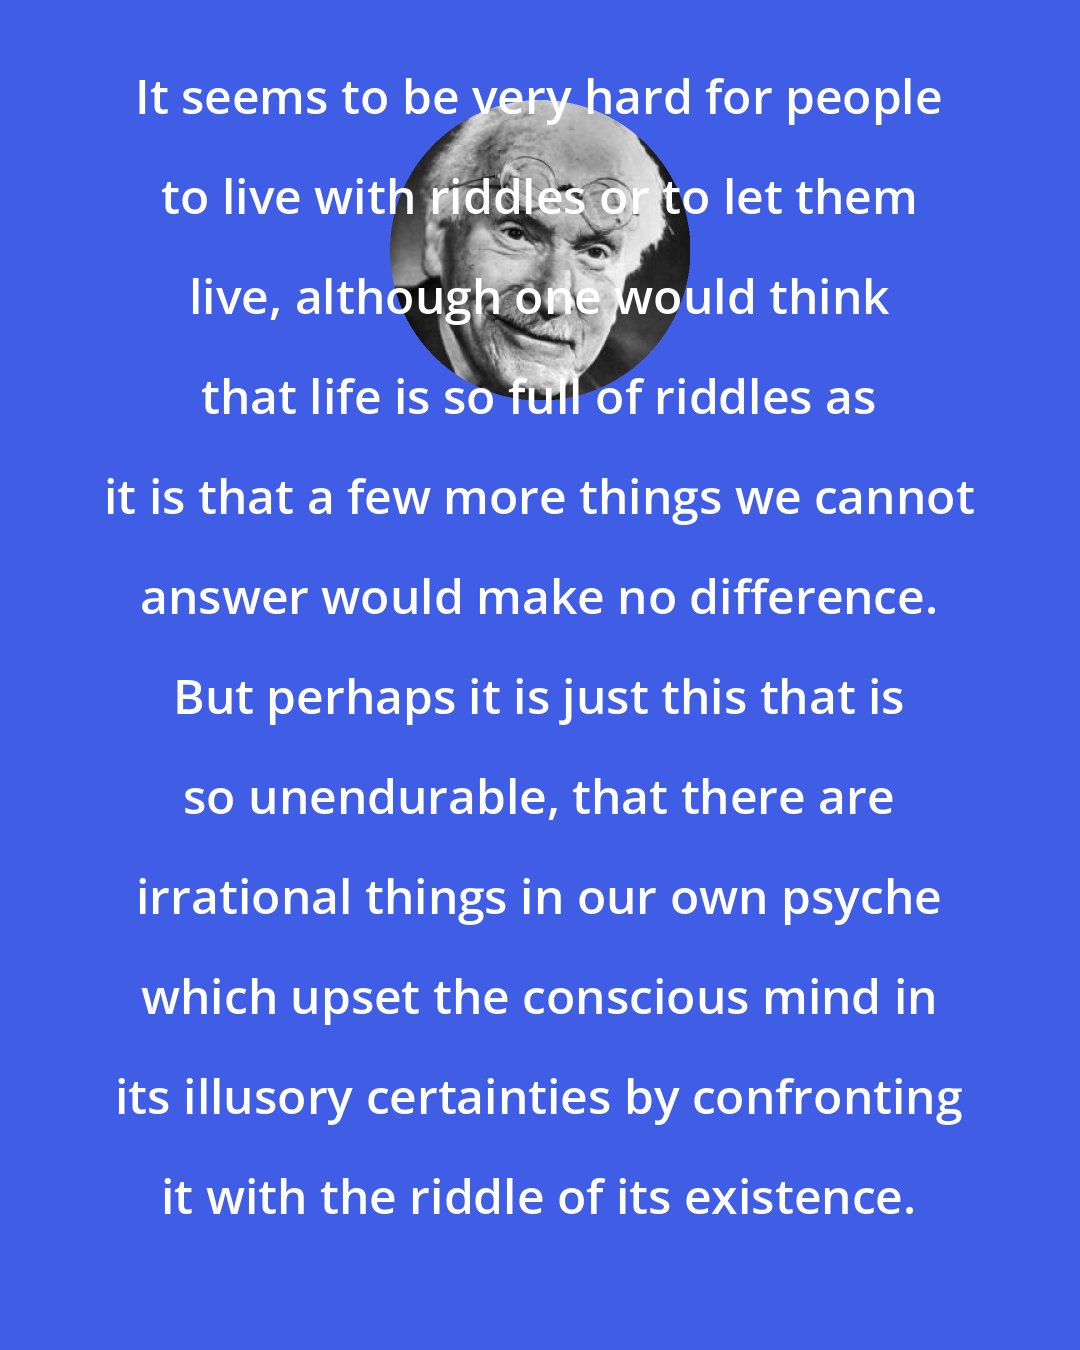 Carl Jung: It seems to be very hard for people to live with riddles or to let them live, although one would think that life is so full of riddles as it is that a few more things we cannot answer would make no difference. But perhaps it is just this that is so unendurable, that there are irrational things in our own psyche which upset the conscious mind in its illusory certainties by confronting it with the riddle of its existence.